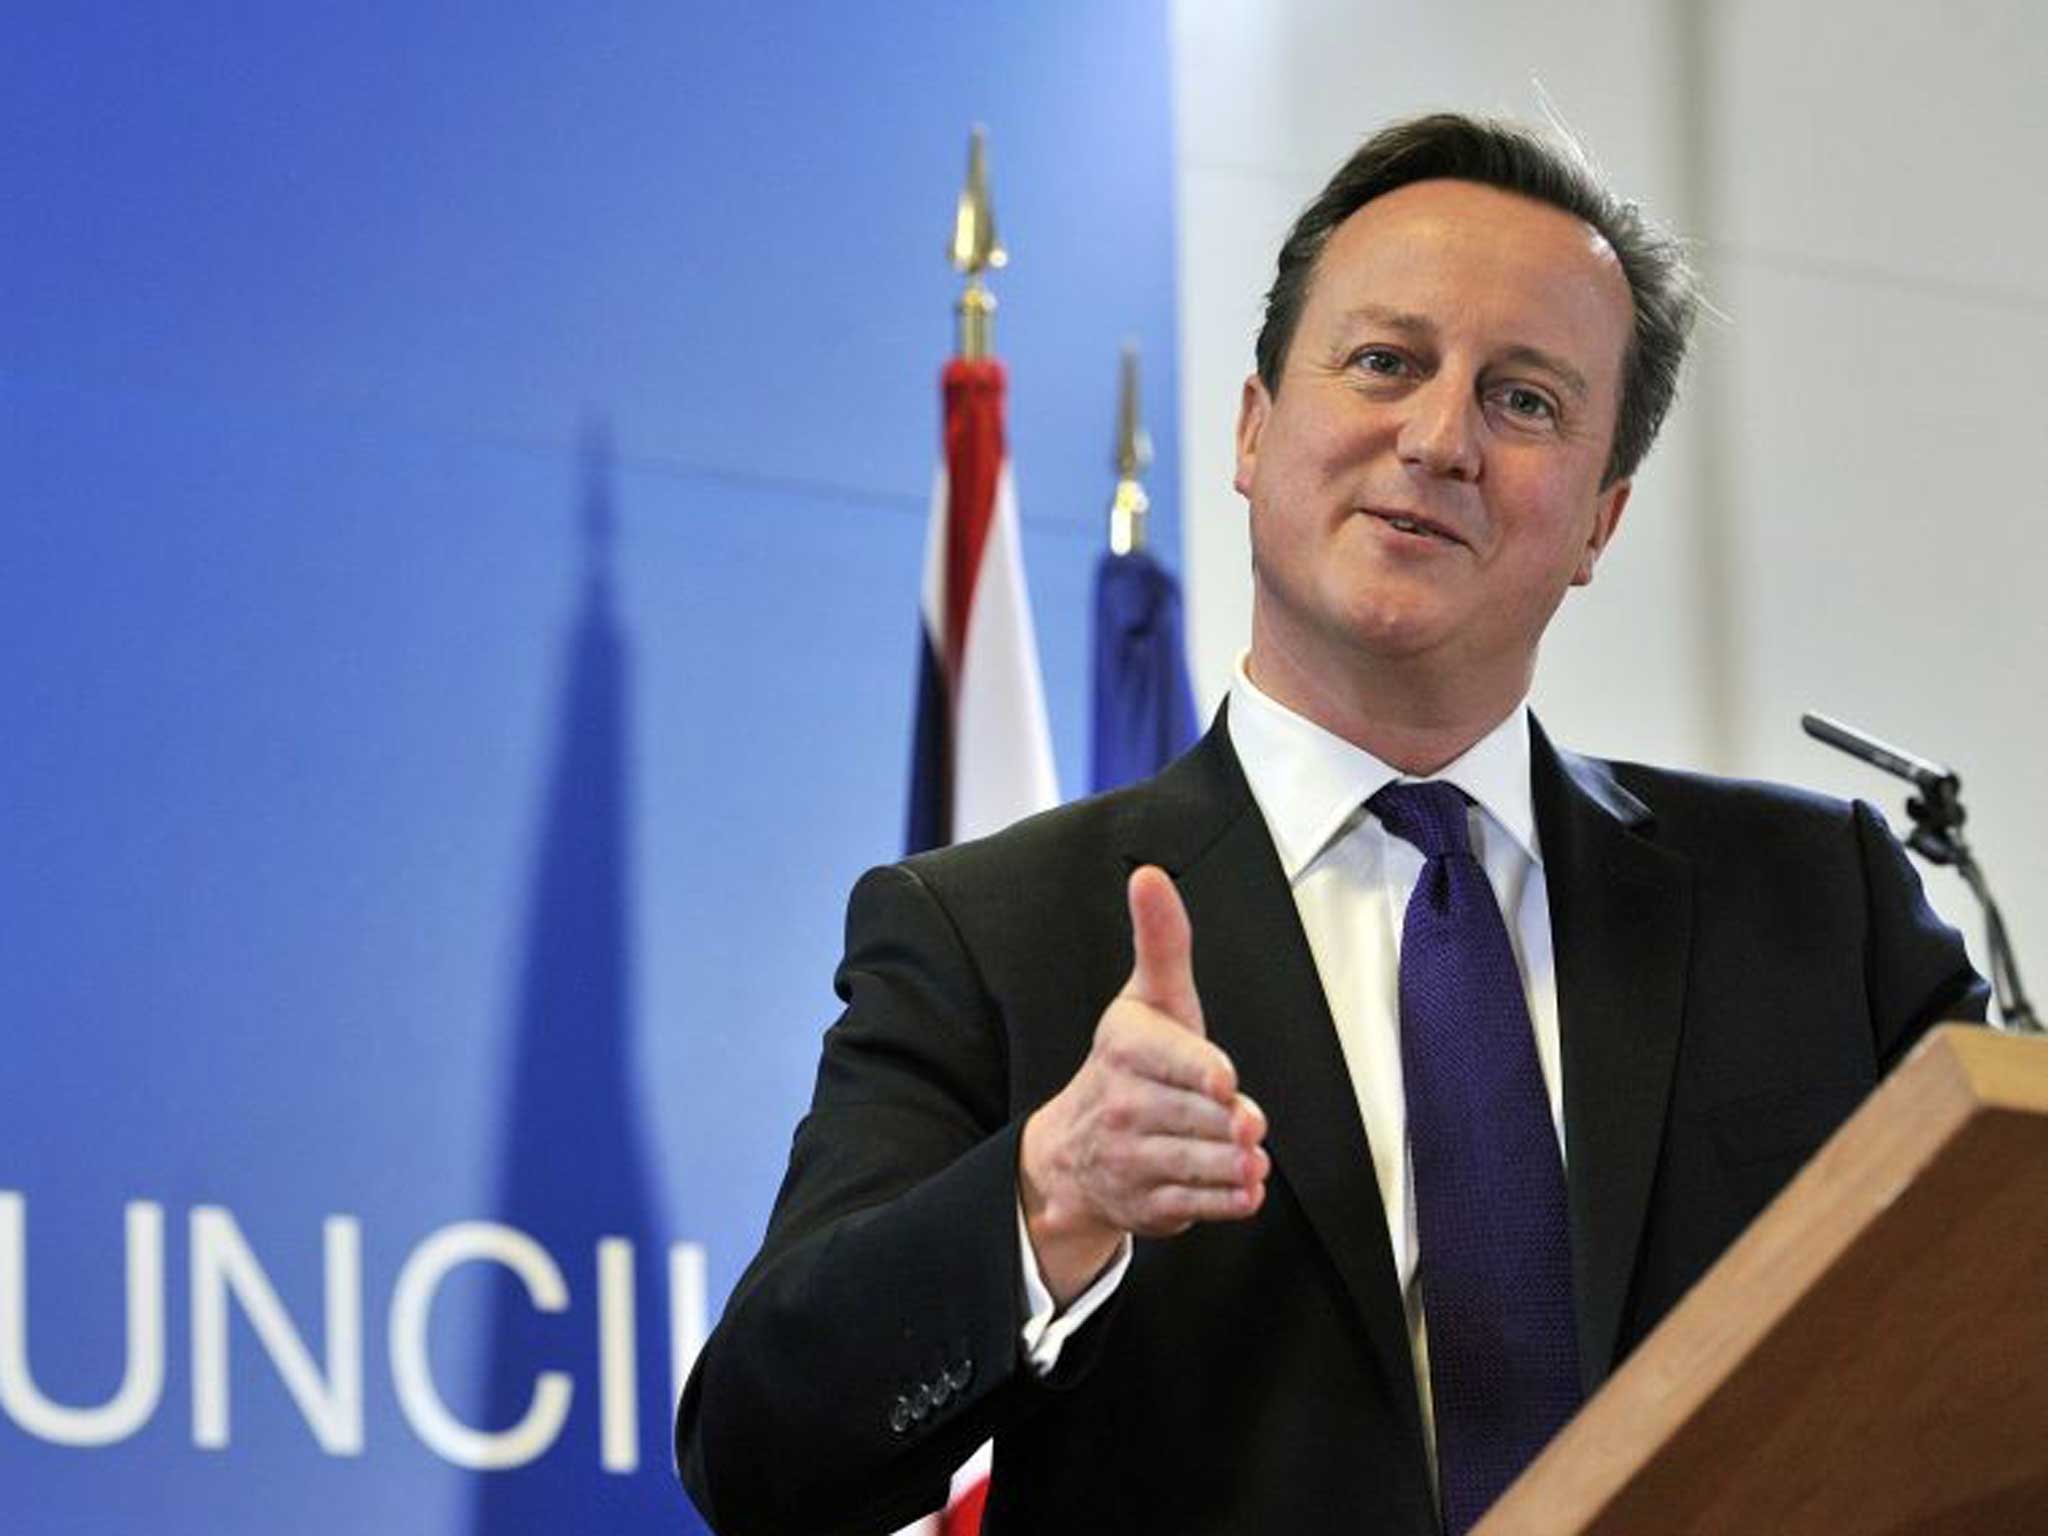 The improving economy may win David Cameron and the Conservatives the next election